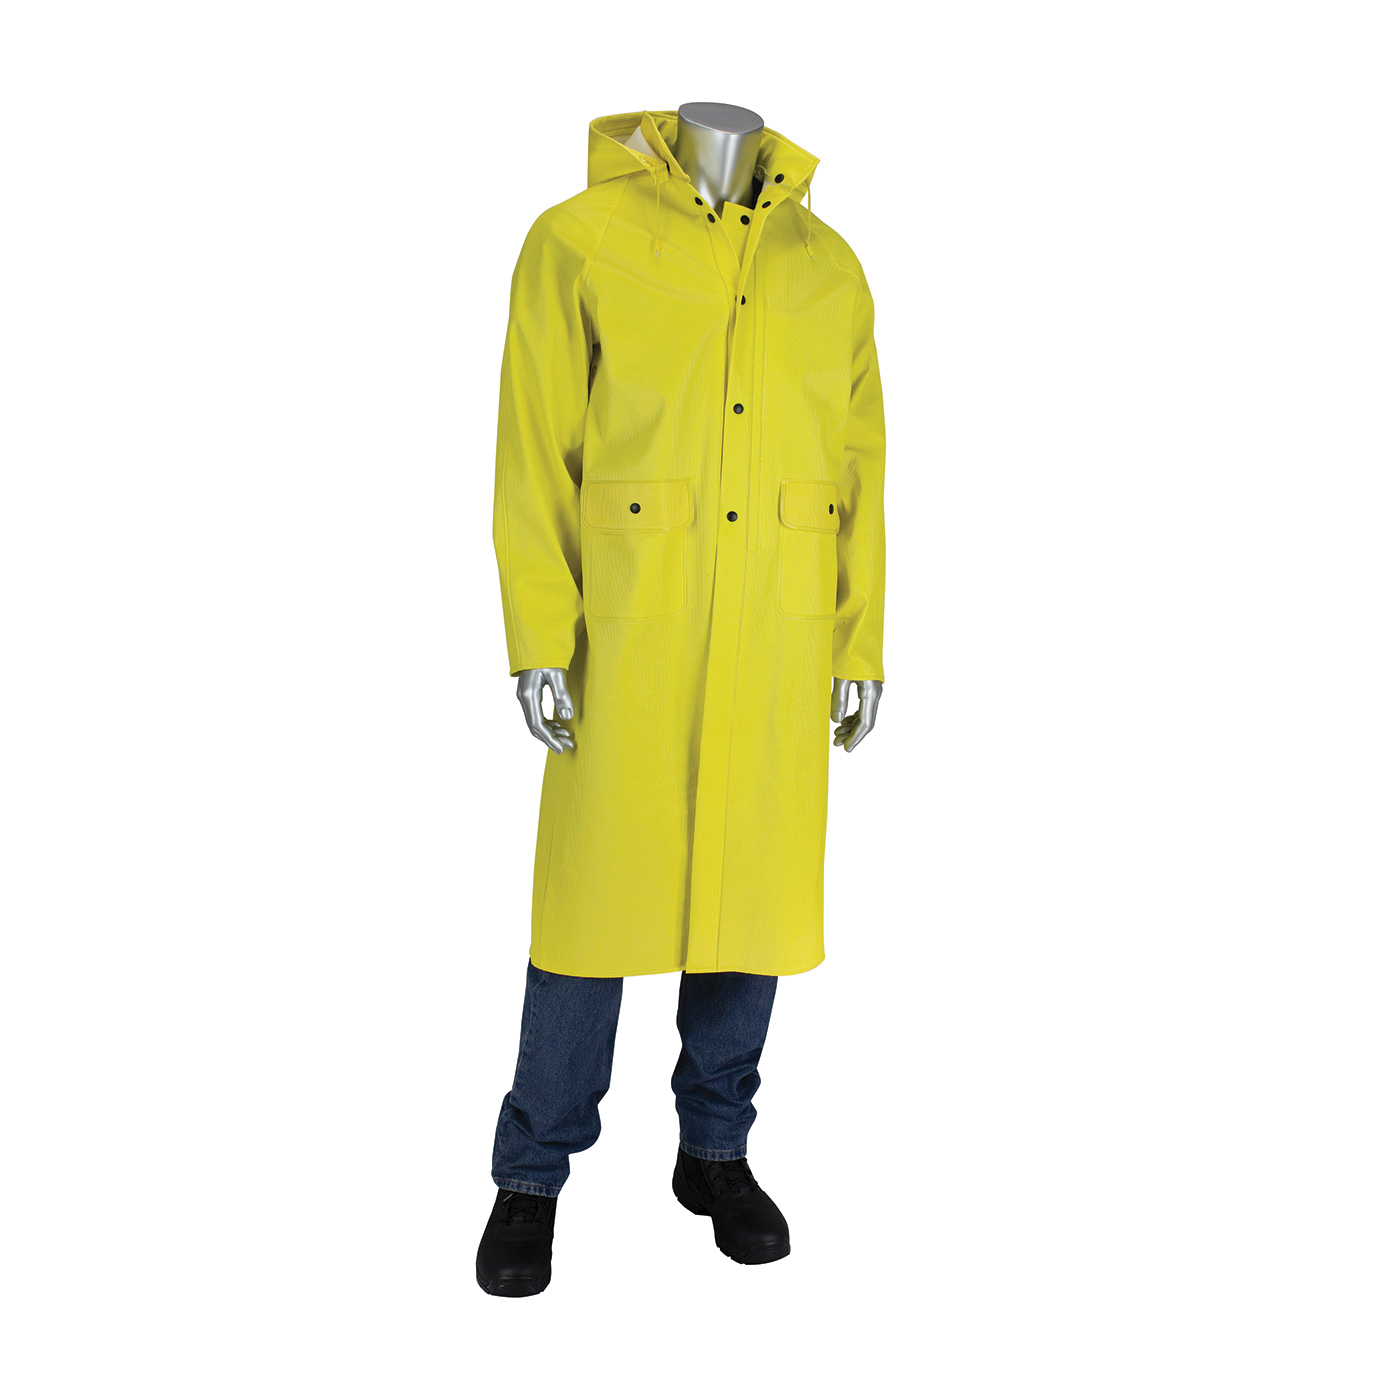 PIP® FALCON™ Flex™ 201-650C/XL 2-Piece Ribbed Rain Jacket With Hood, XL, Yellow, PVC/Non-Woven Polyester, Resists: Rips, Tear and Water